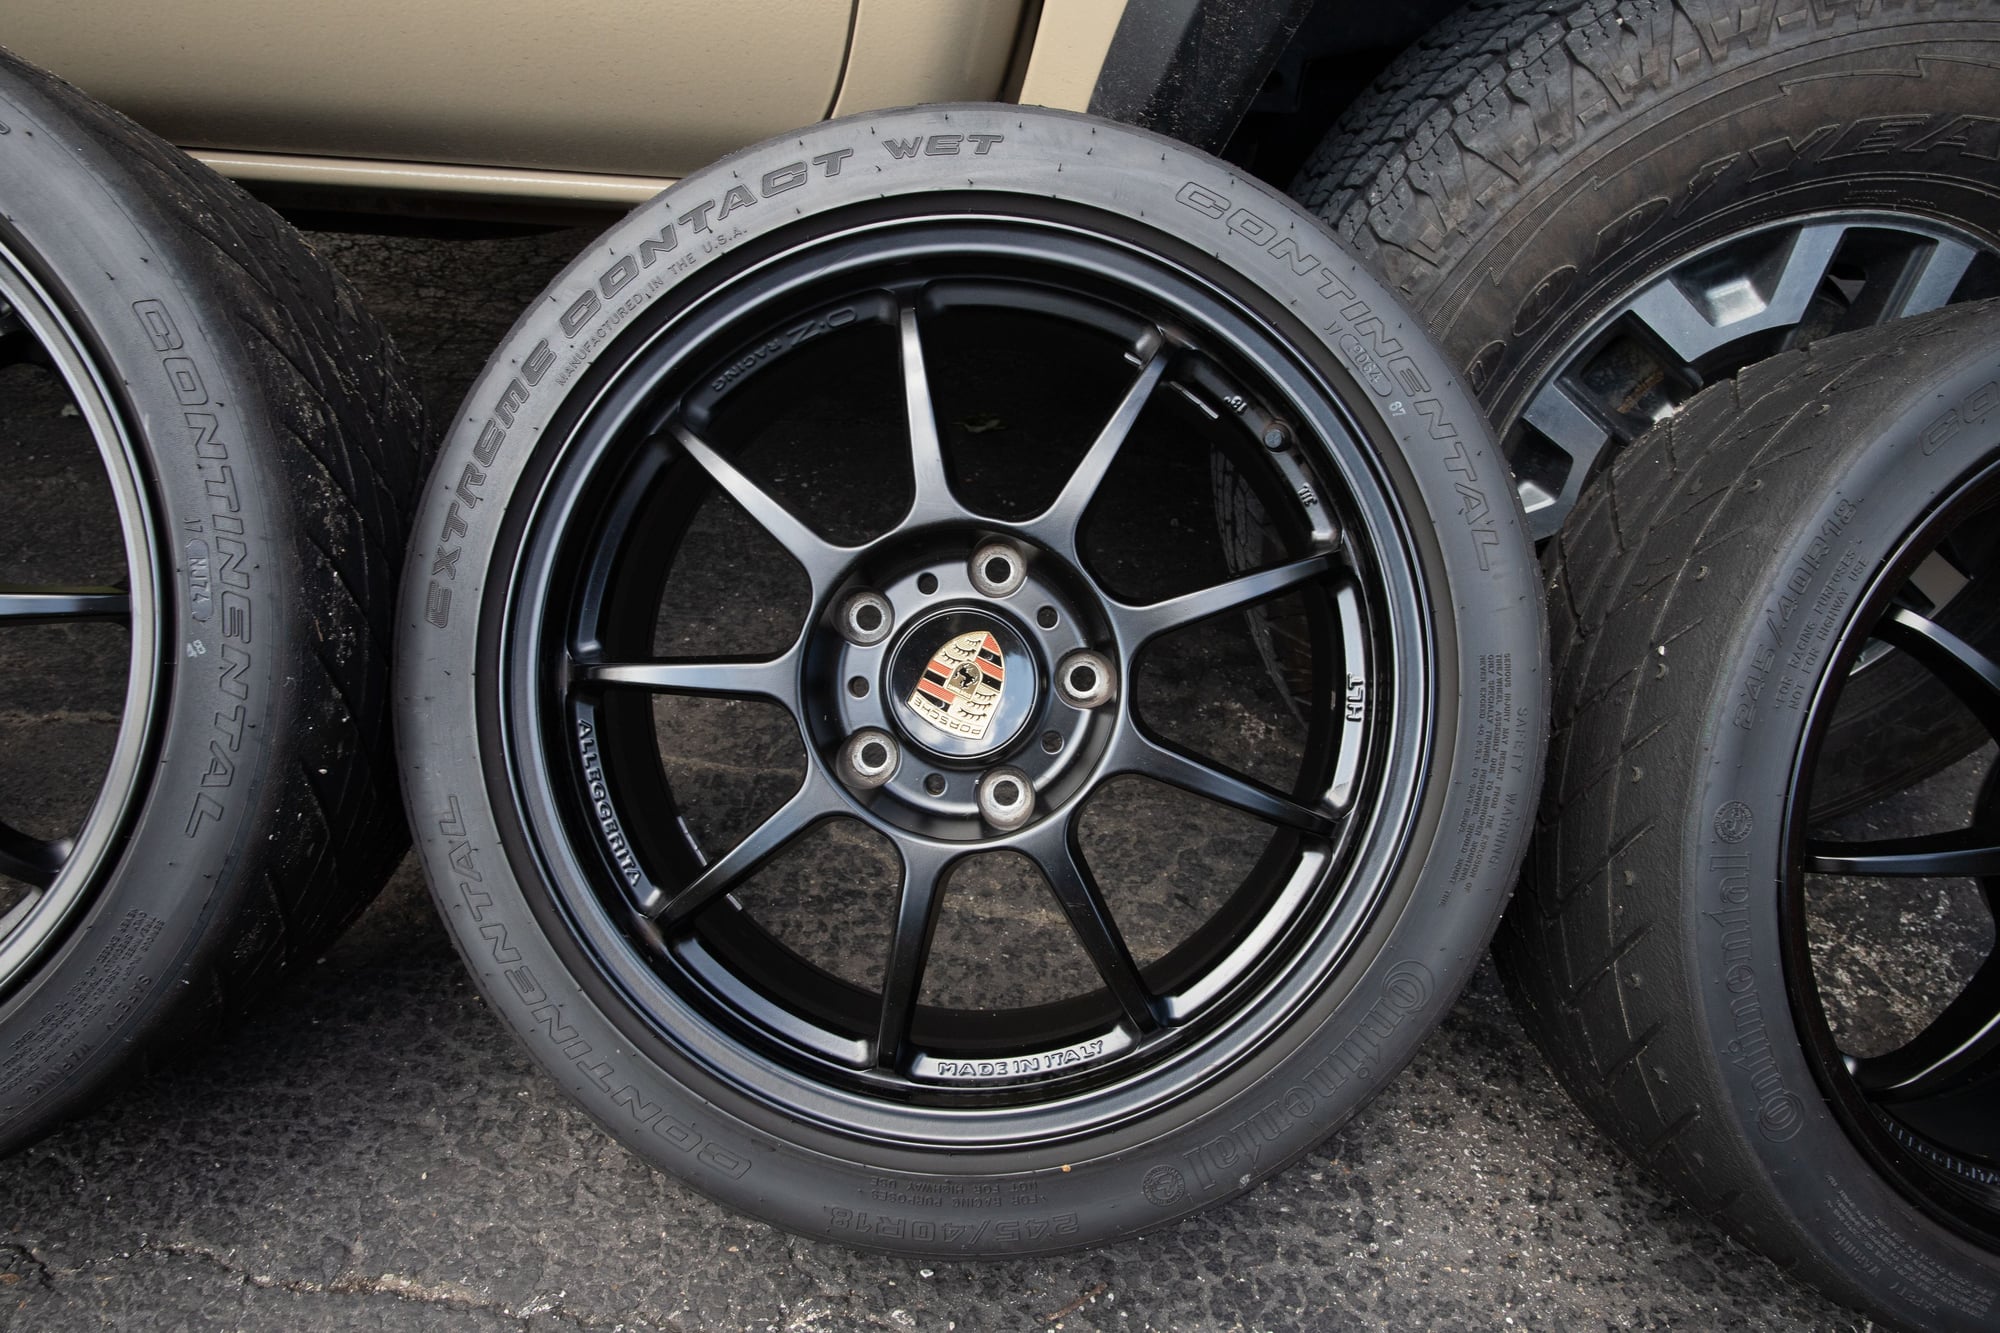 Wheels and Tires/Axles - OZ Racing Alleggerita 18" wheels and slicks - 996/997 - Used - 1999 to 2010 Porsche 911 - Bloomington, IN 47403, United States